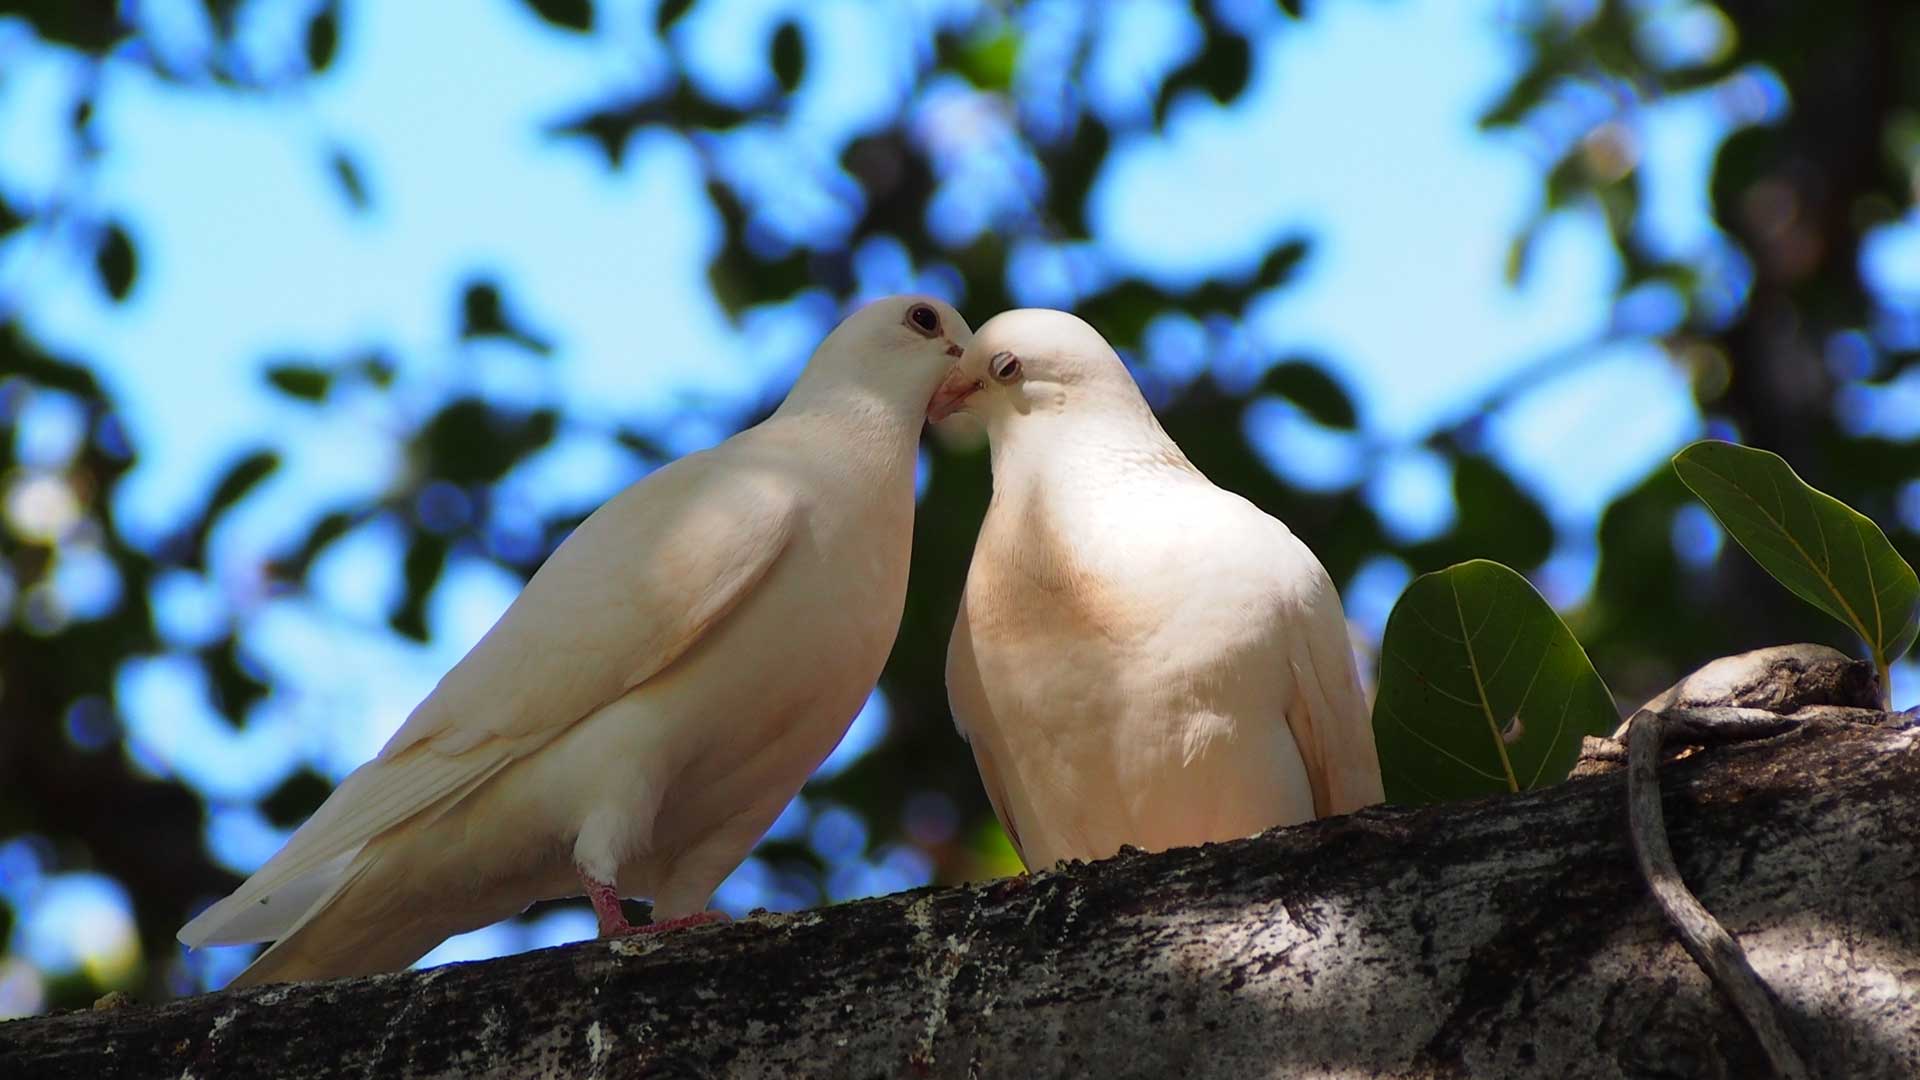 Two of our white doves sitting on a tree branch.